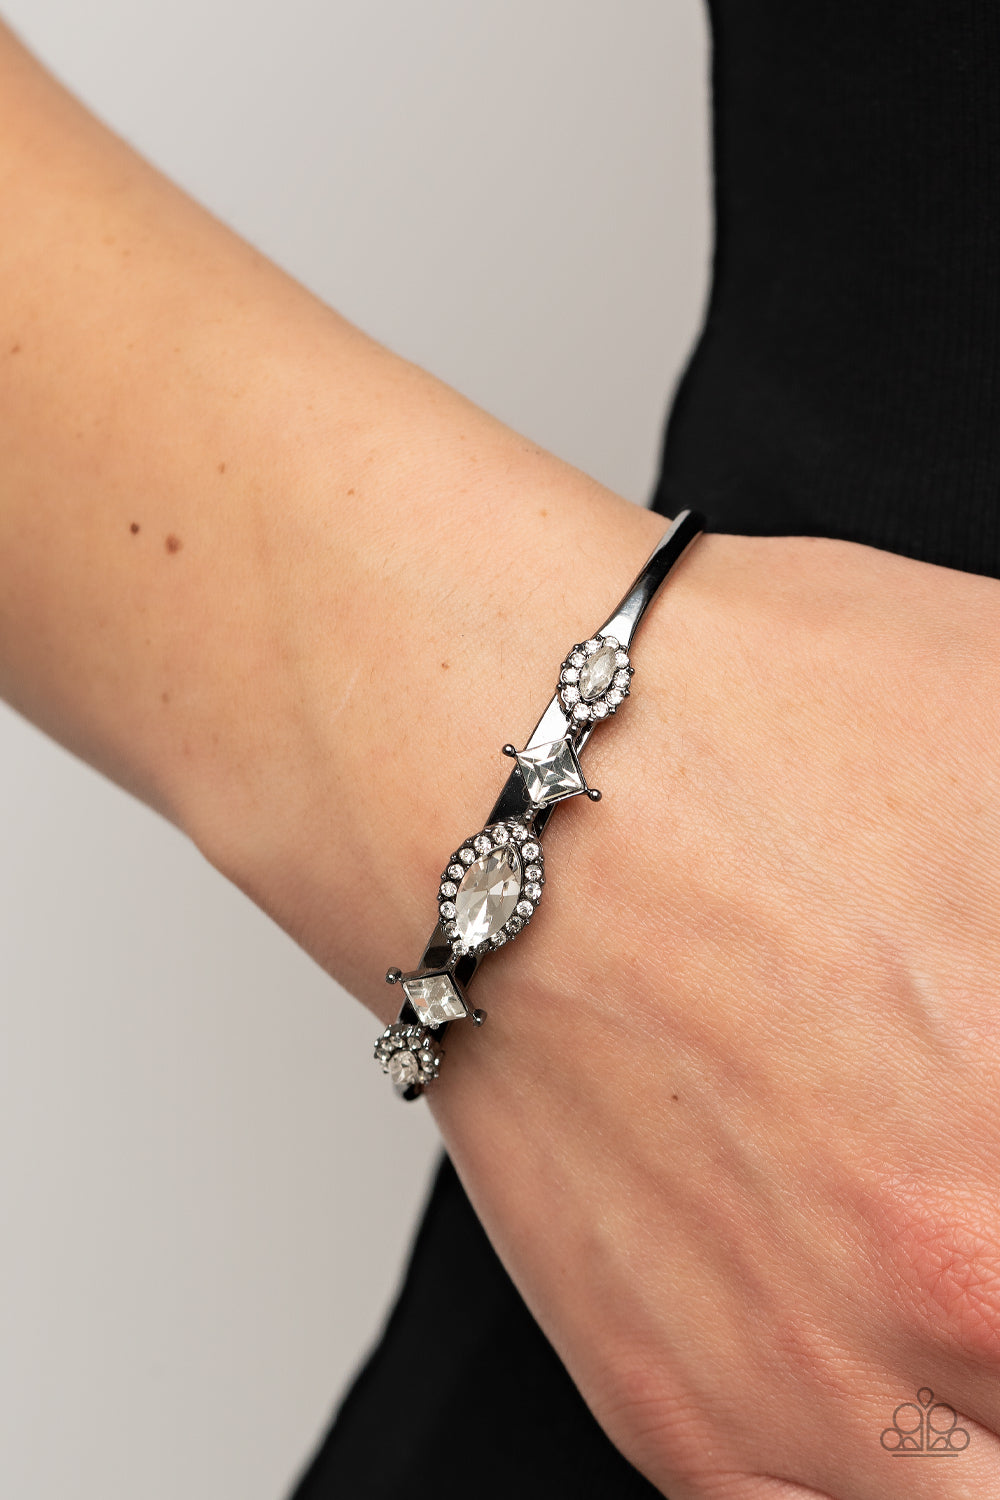 Bordered in glassy white rhinestones, a dainty arrangement of marquise cut rhinestones alternates with tilted square cut rhinestones across the front of a dainty gunmetal cuff for a surprisingly sparkly finish.  Sold as one individual bracelet.